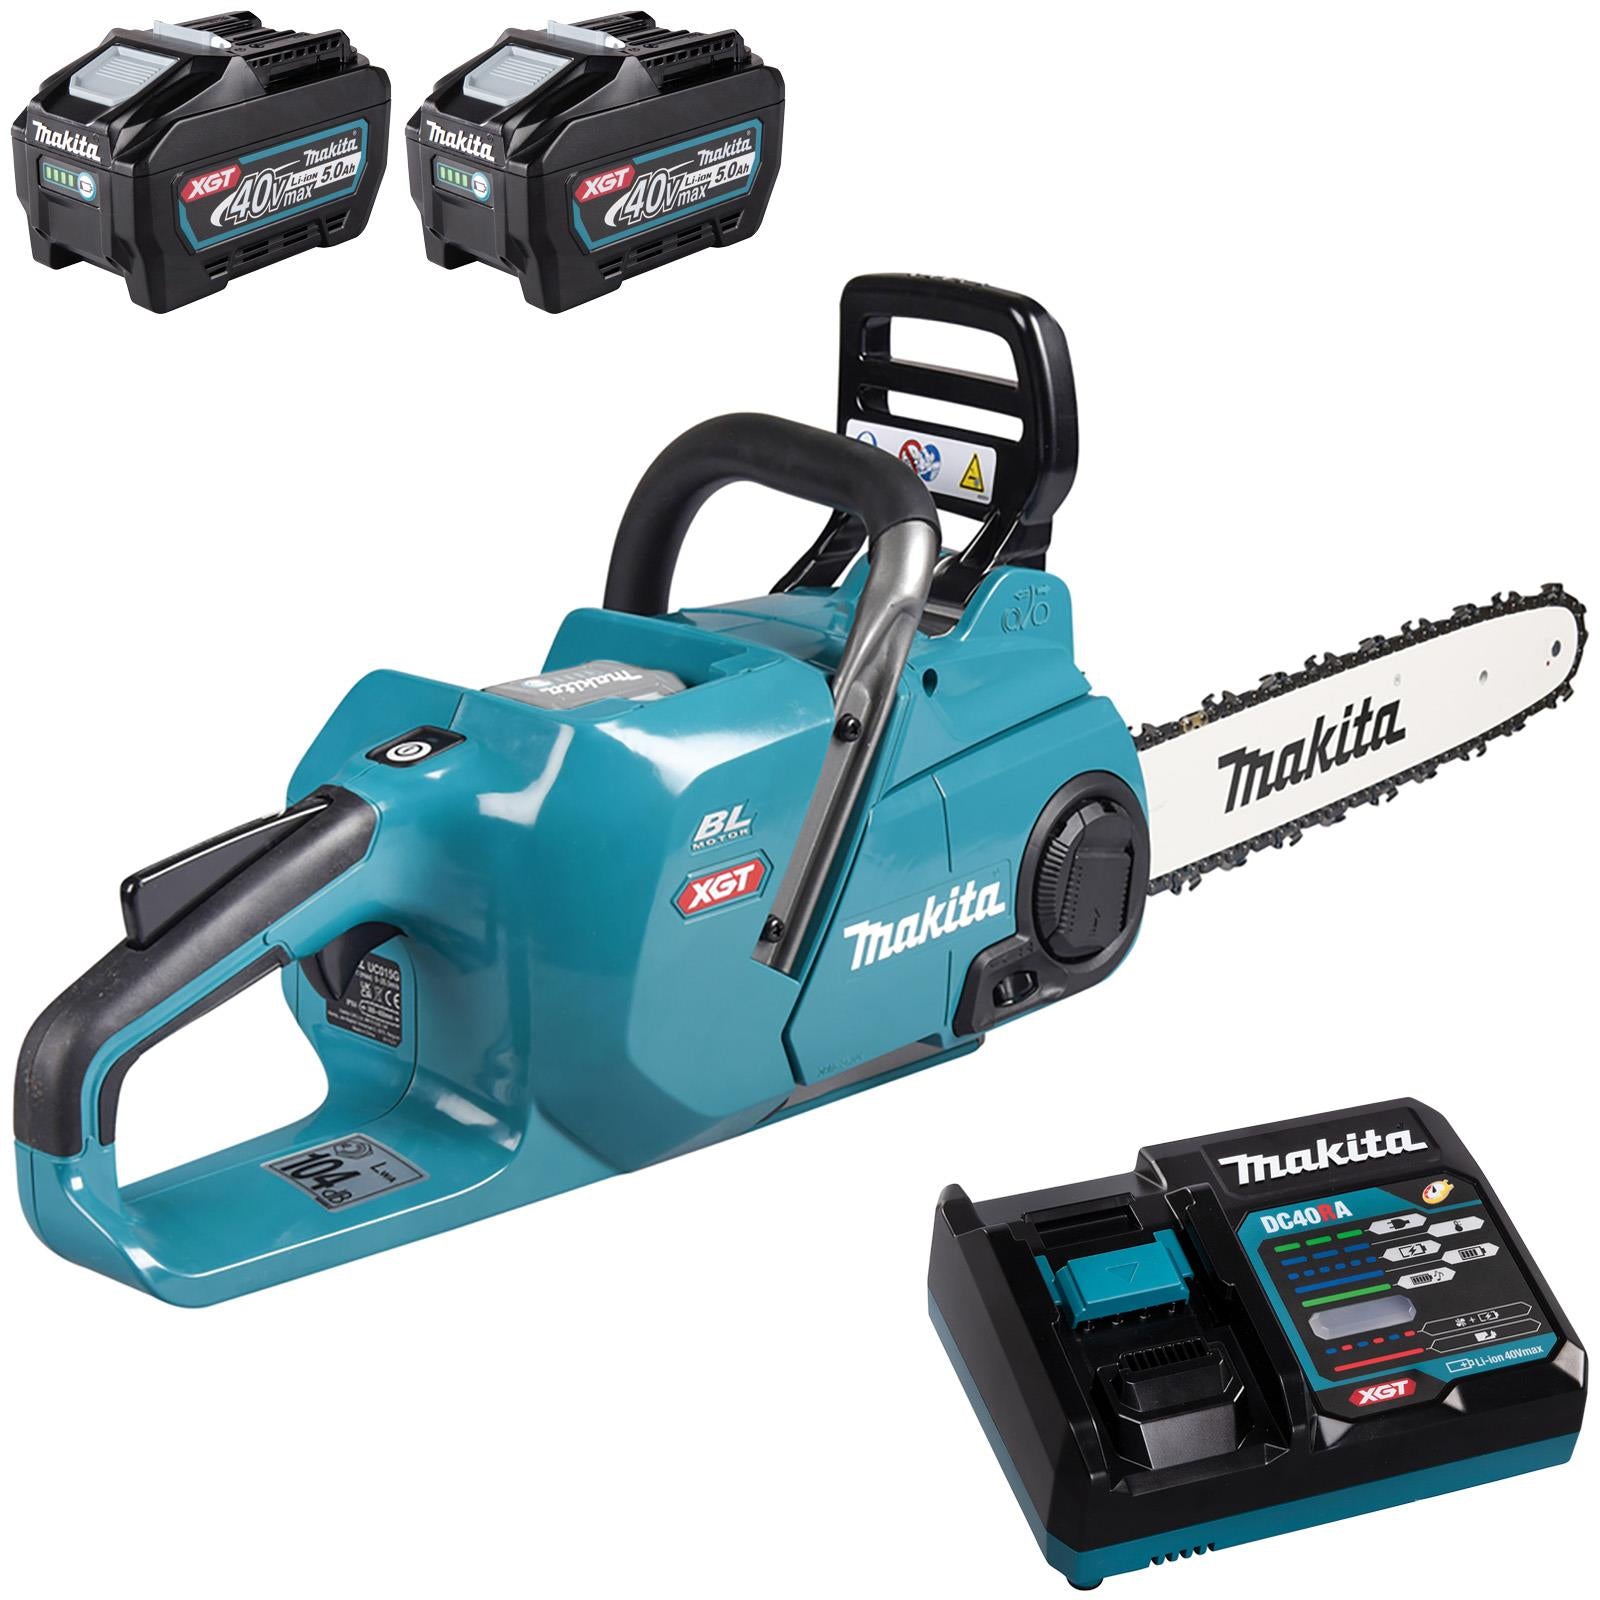 Makita Chainsaw Kit Heavy Duty 35cm 14" 40V XGT Brushless Cordless 2 x 5Ah Battery and Rapid Charger Garden Tree Cutting Pruning UC015GT201